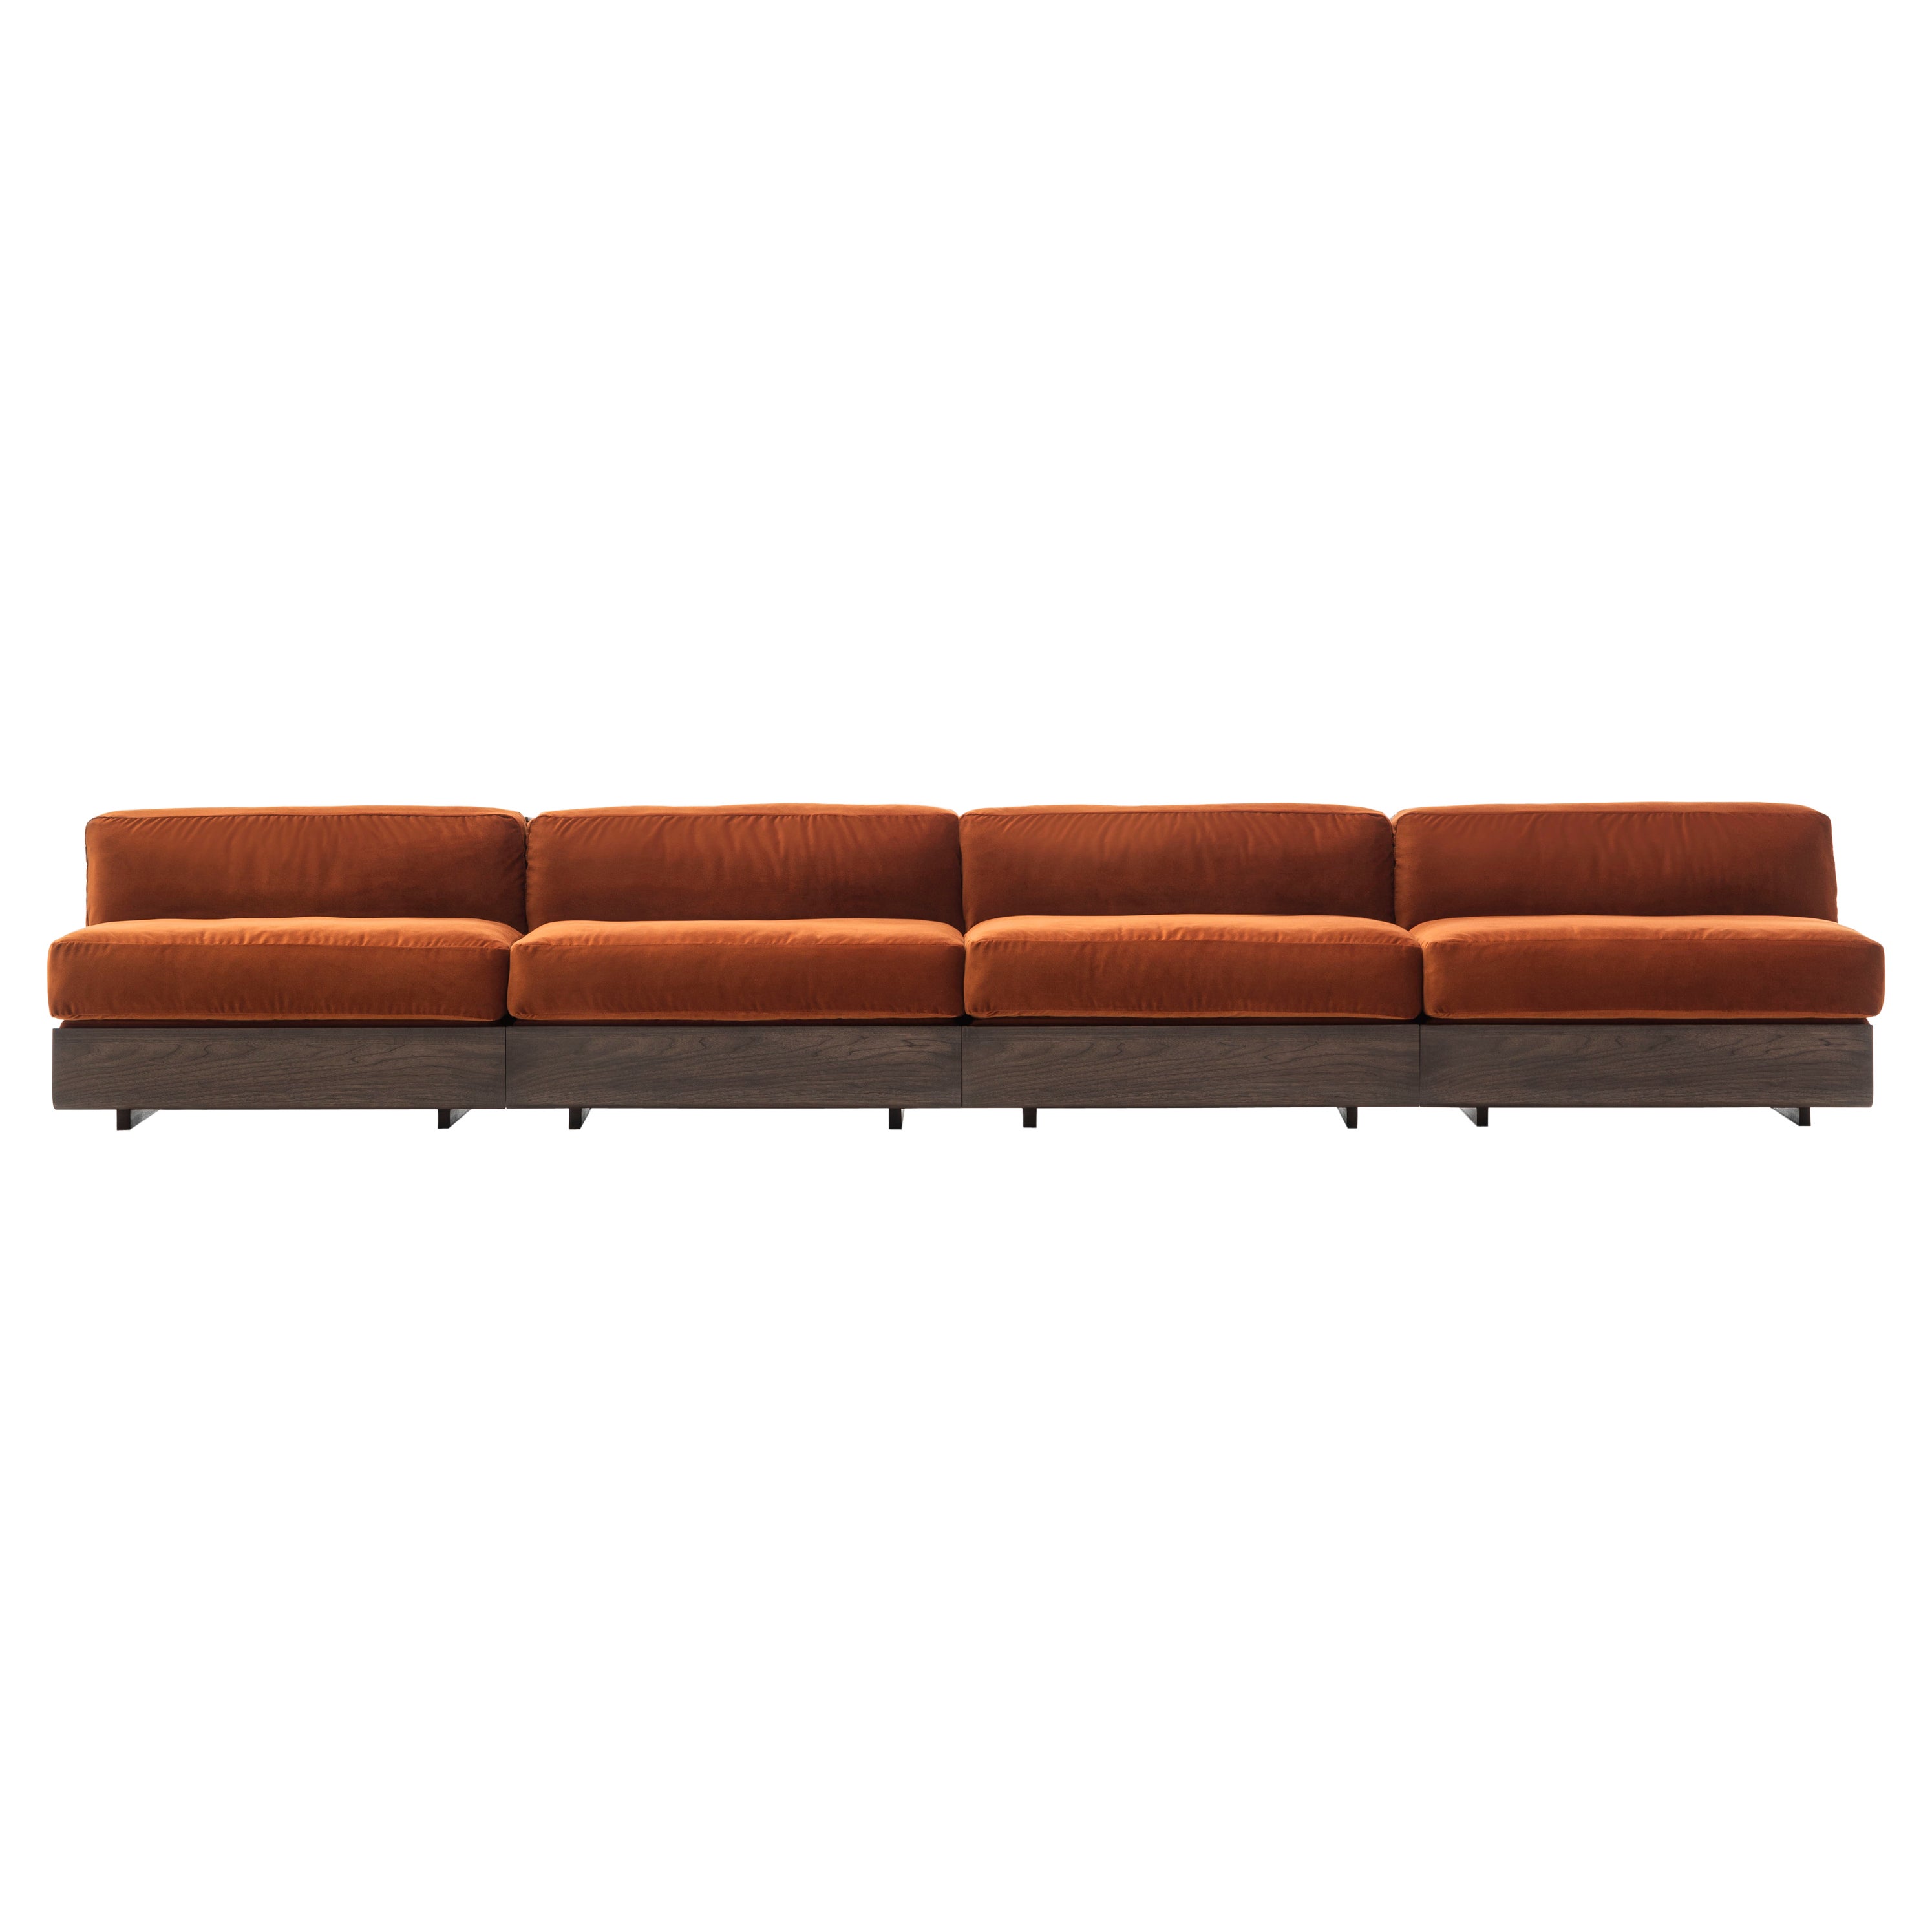 Acerbis Life Sofa in Brown Upholstery with Dark Stained Walnut Frame For Sale